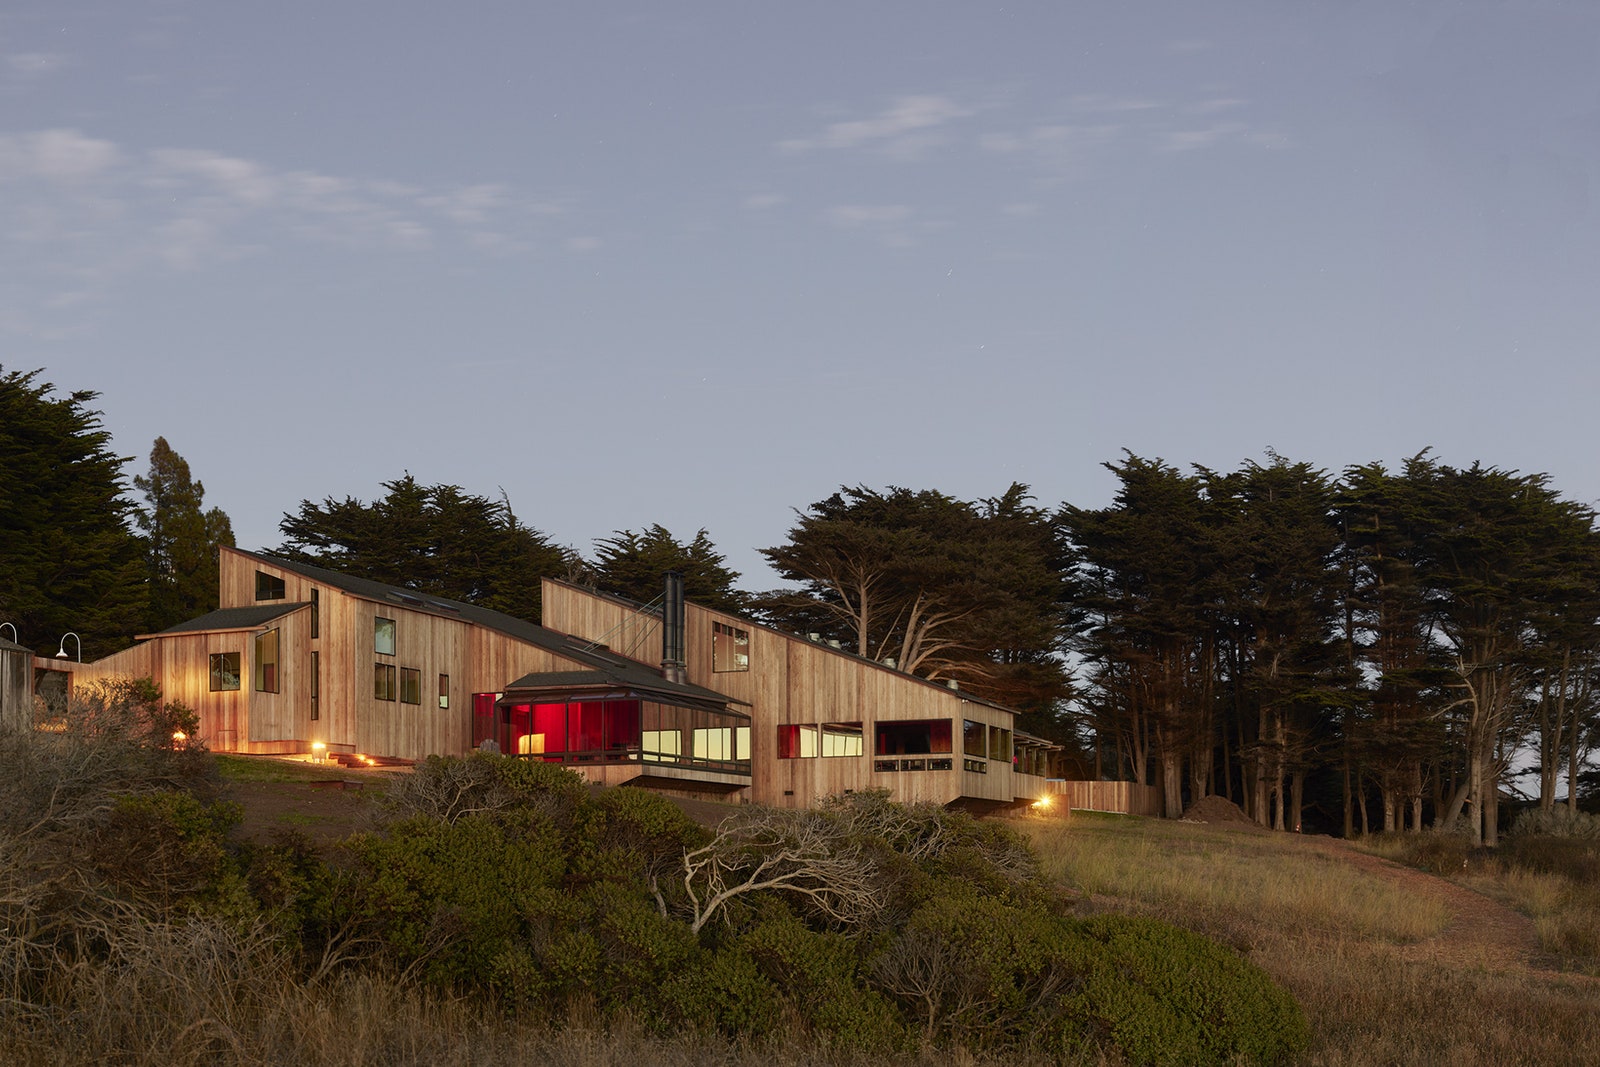 The Sea Ranch Lodge: First In